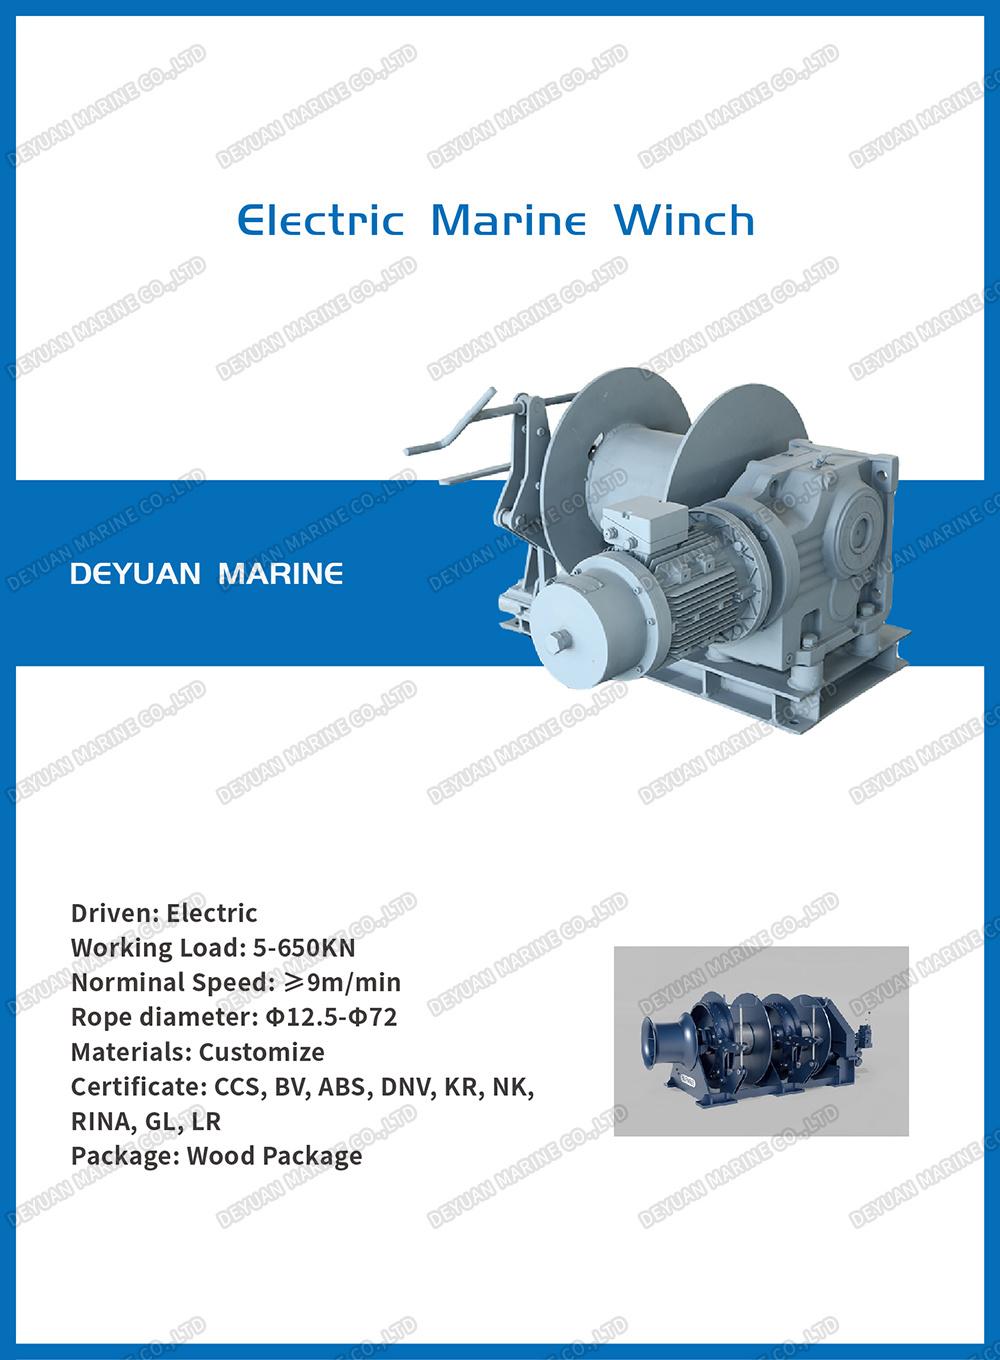 Ship Electric Single Drum Mooring Winch for Marine Use